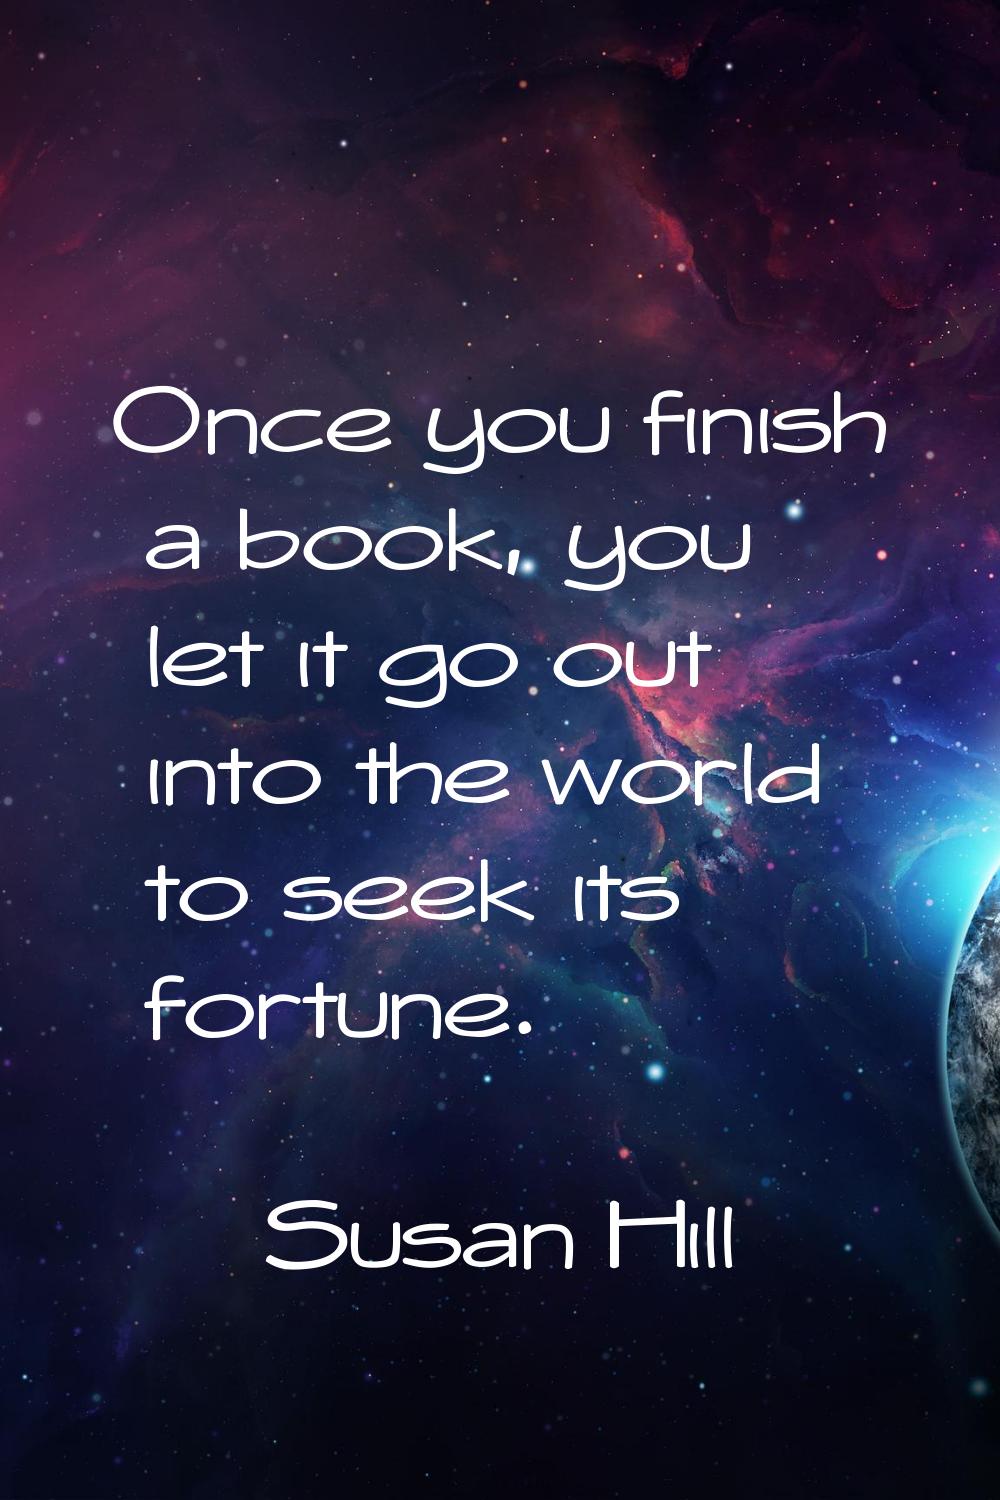 Once you finish a book, you let it go out into the world to seek its fortune.